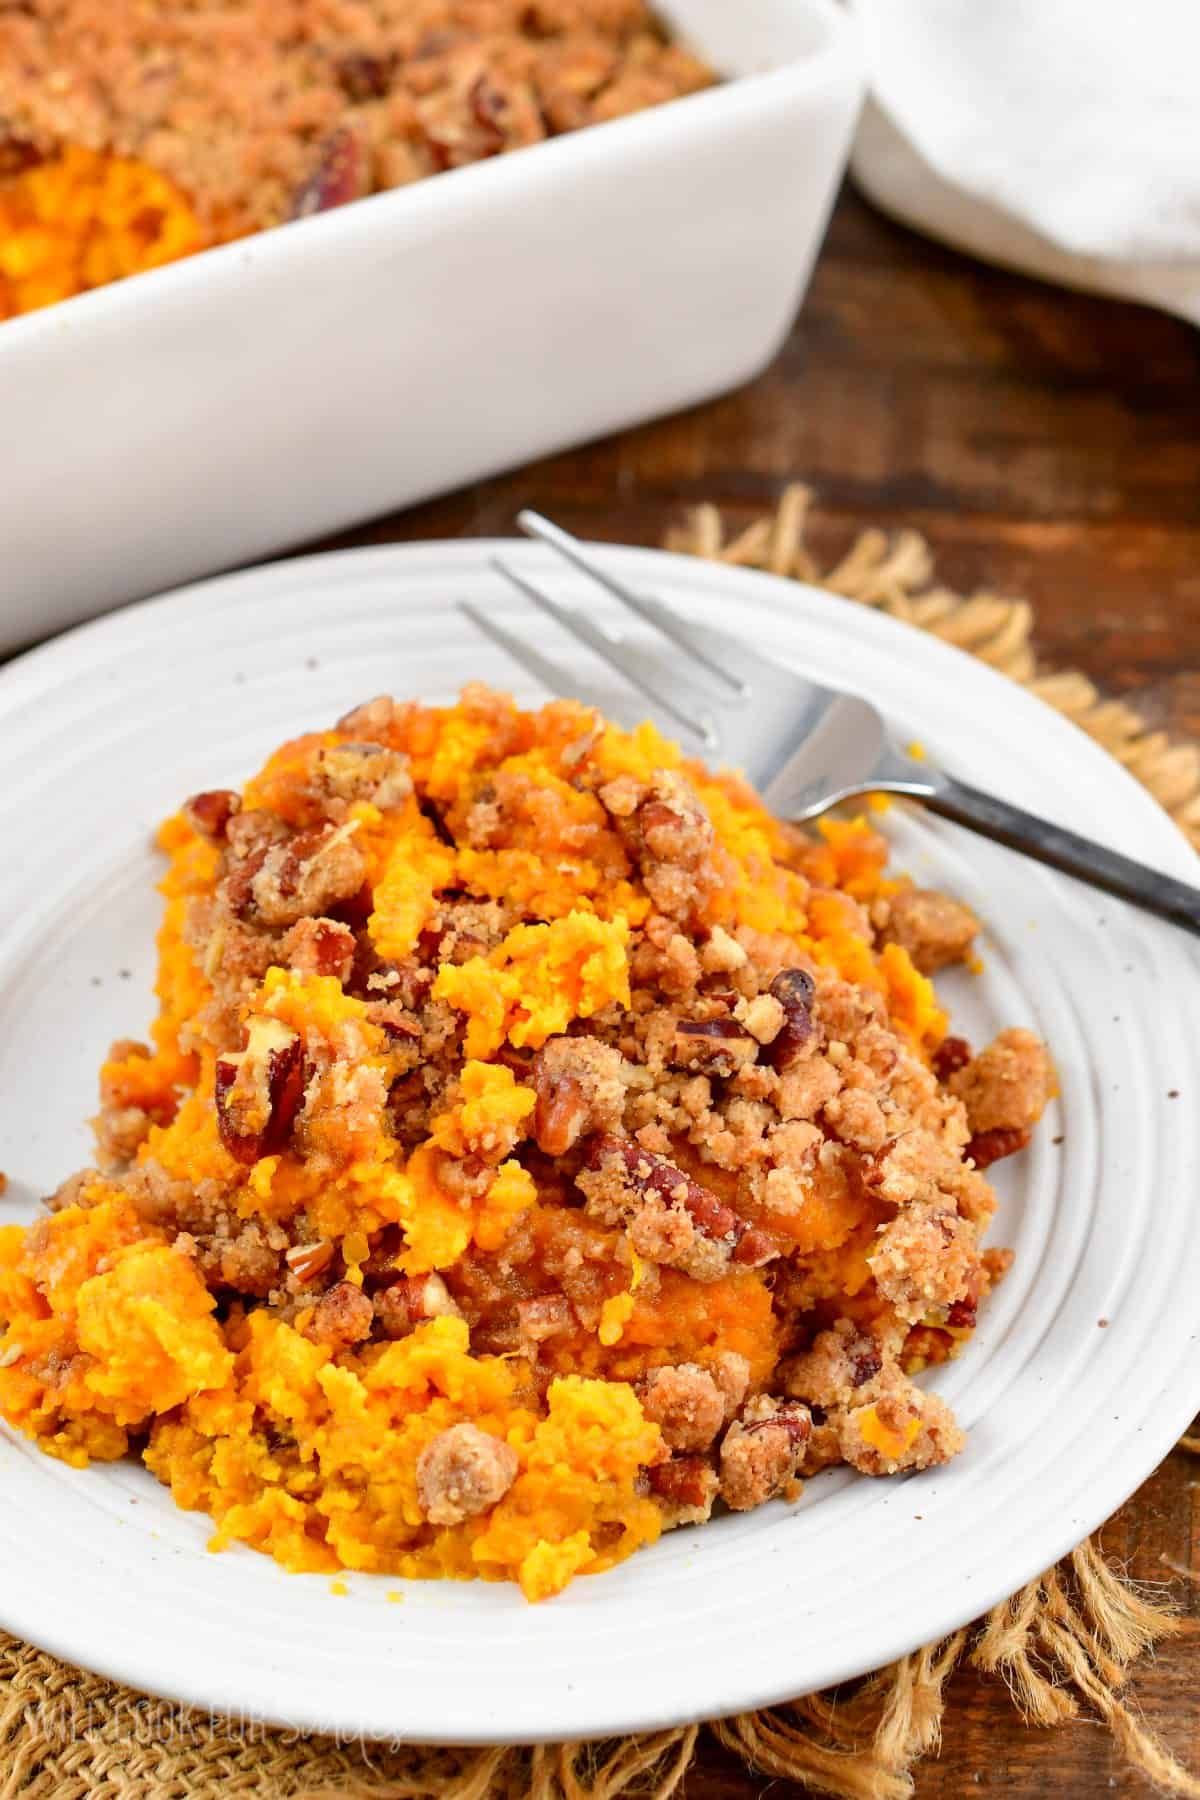 portion of a sweet potato casserole with a pecan crumble topping.